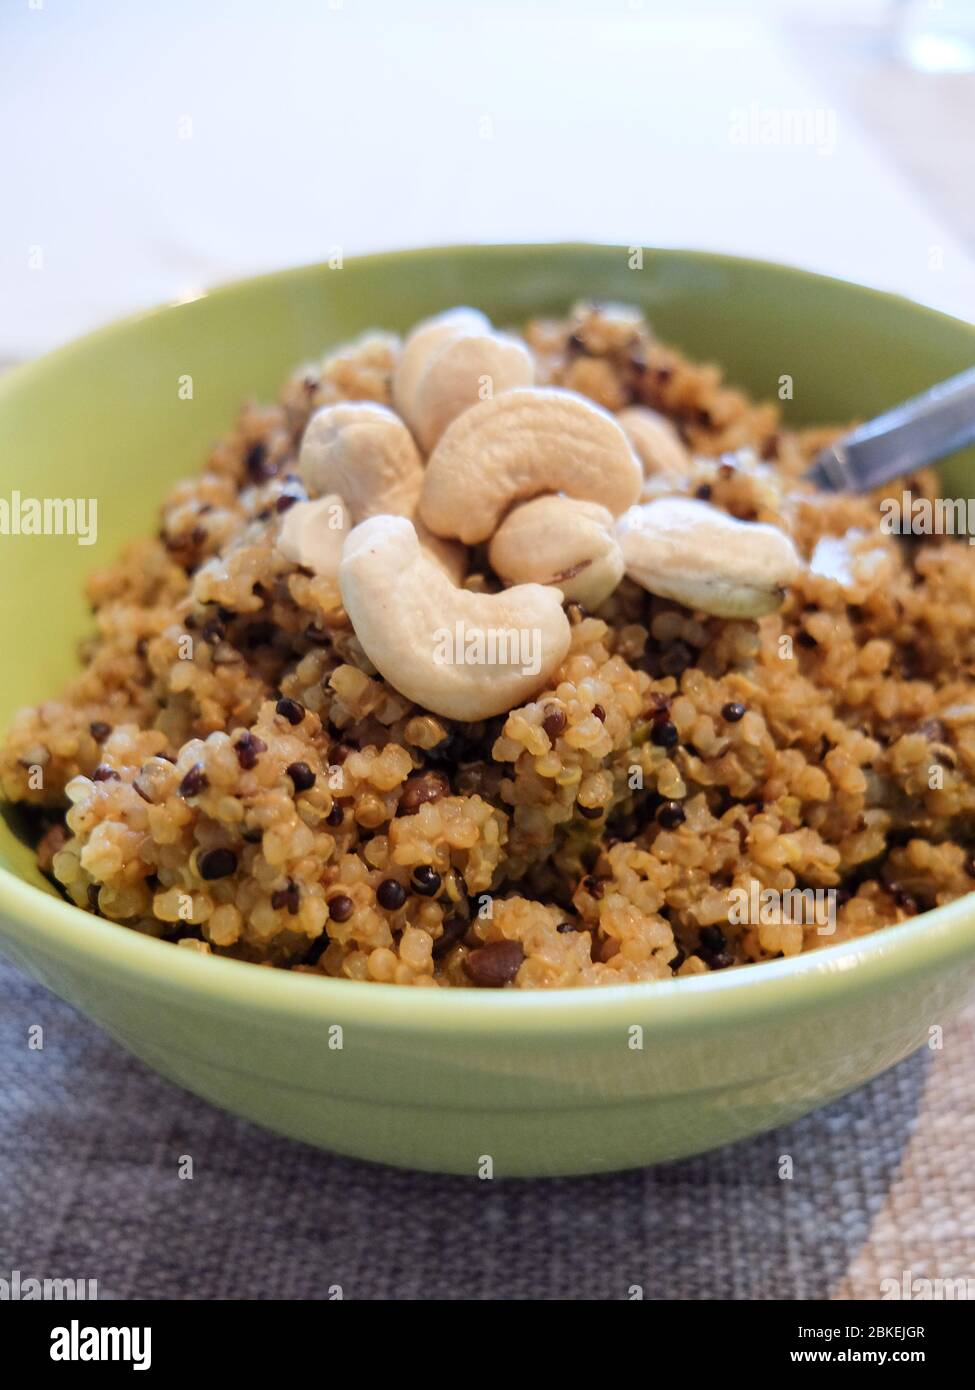 Vegetarian quinoa dish served in a bowl Stock Photo